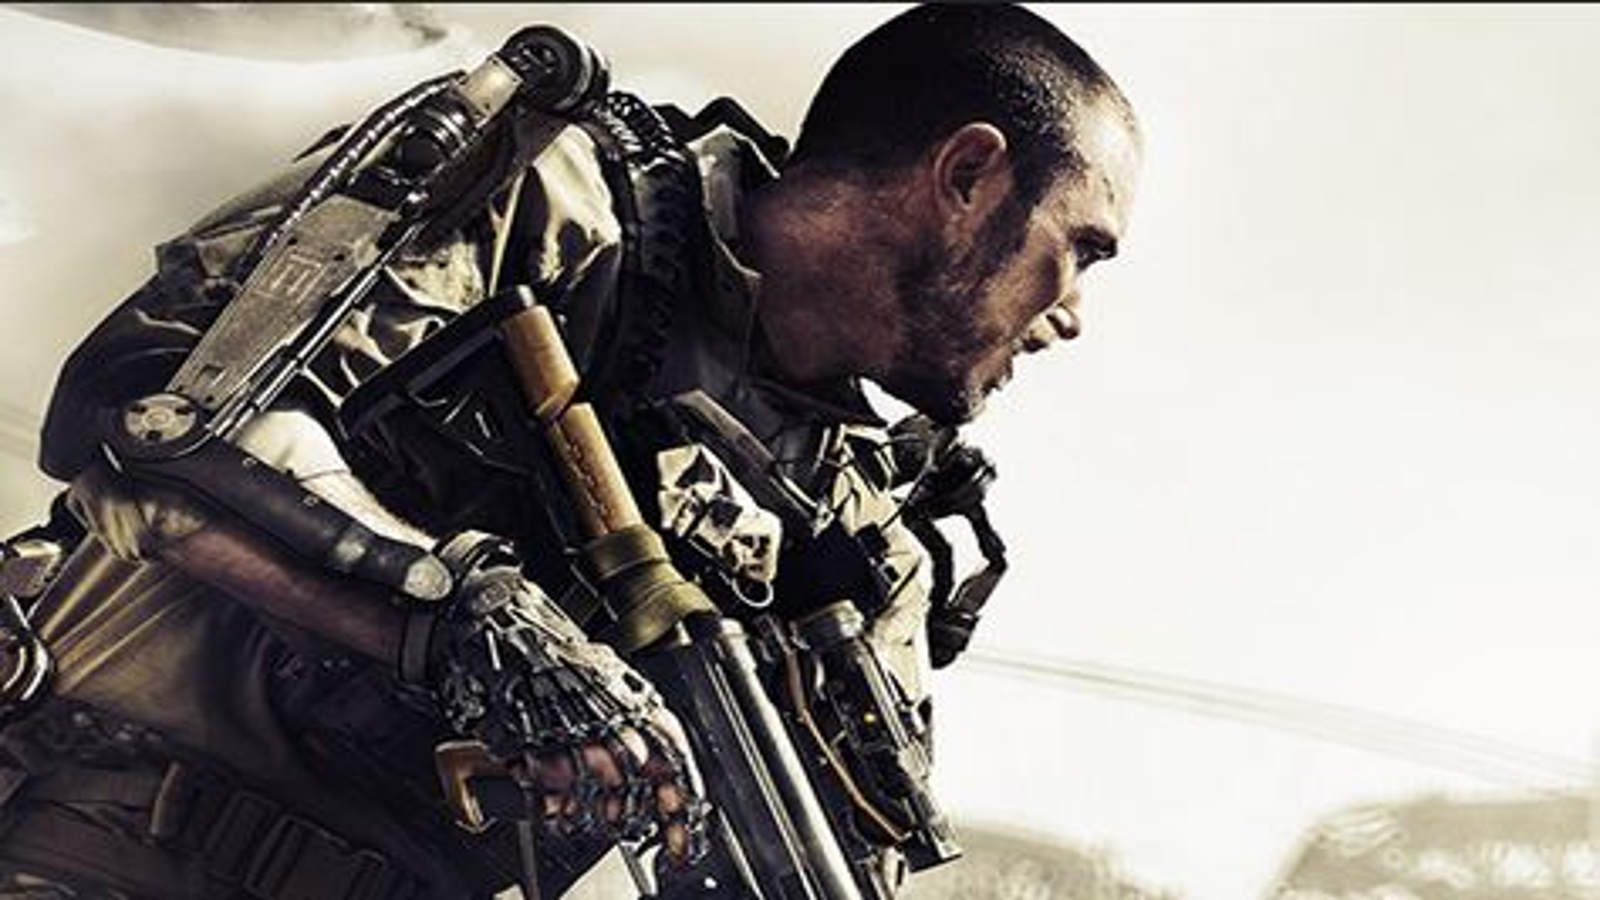 Discussion - Entire cast of Advanced Warfare reportedly revealed